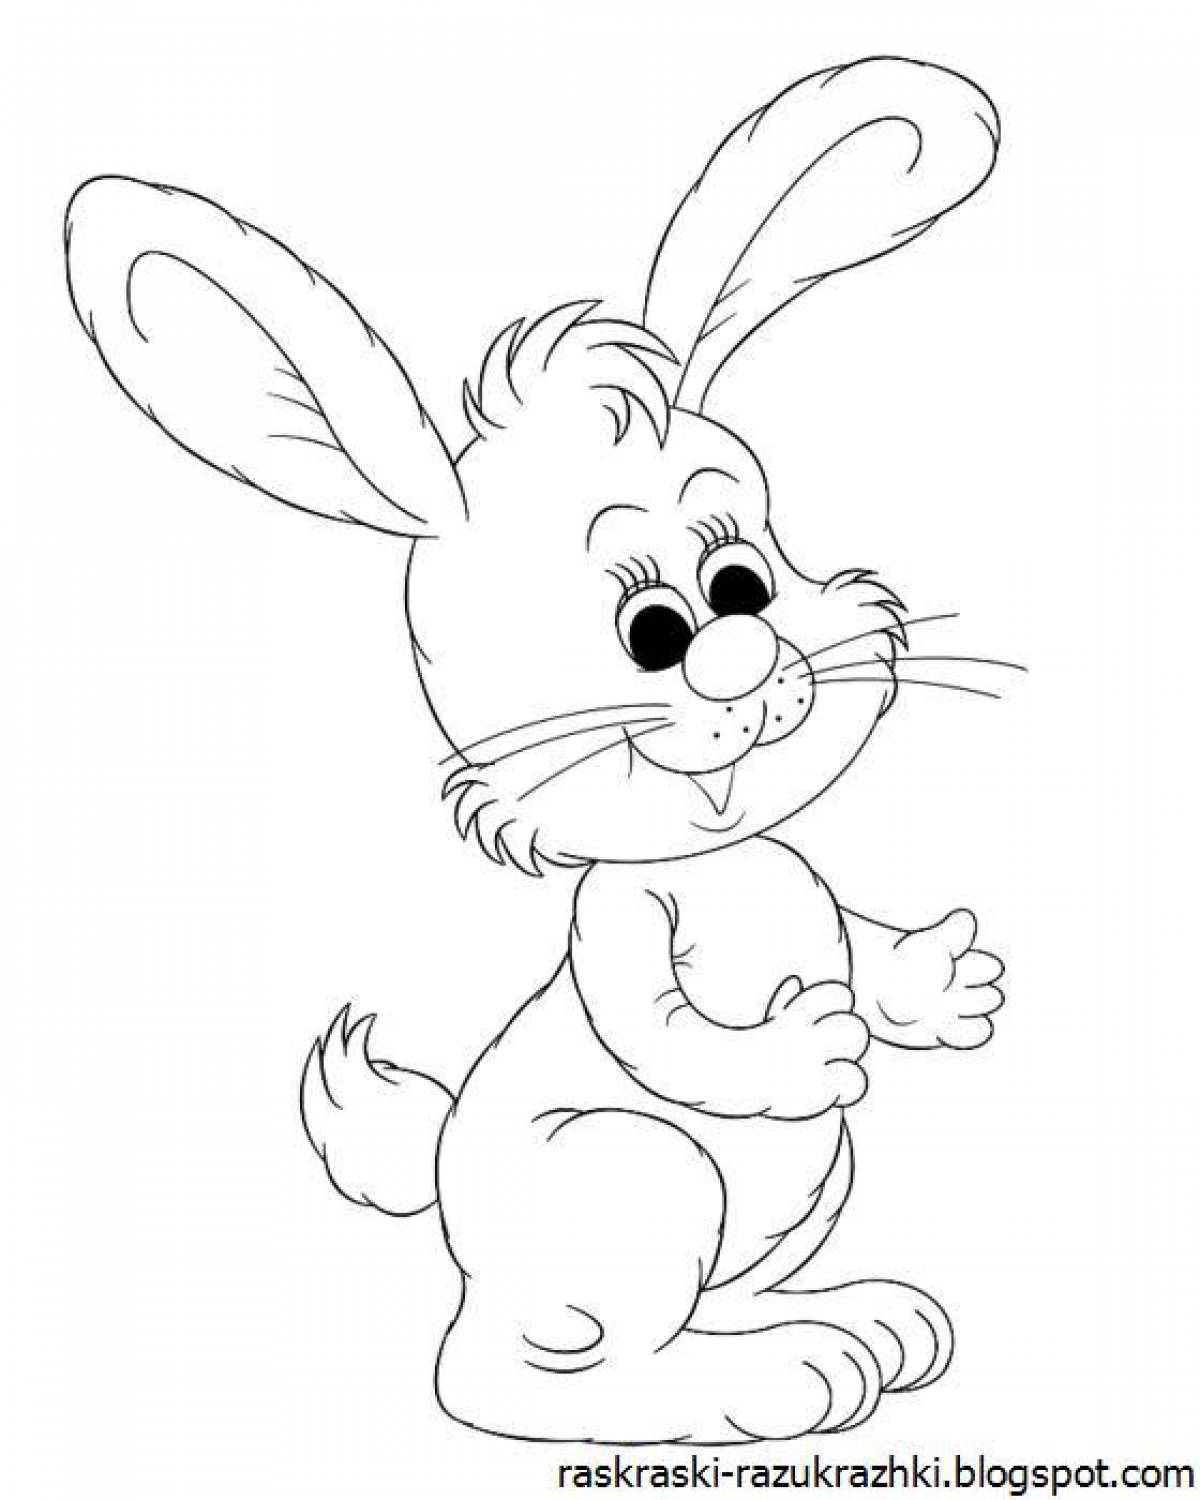 Fabulous rabbit coloring book for kids 3-4 years old